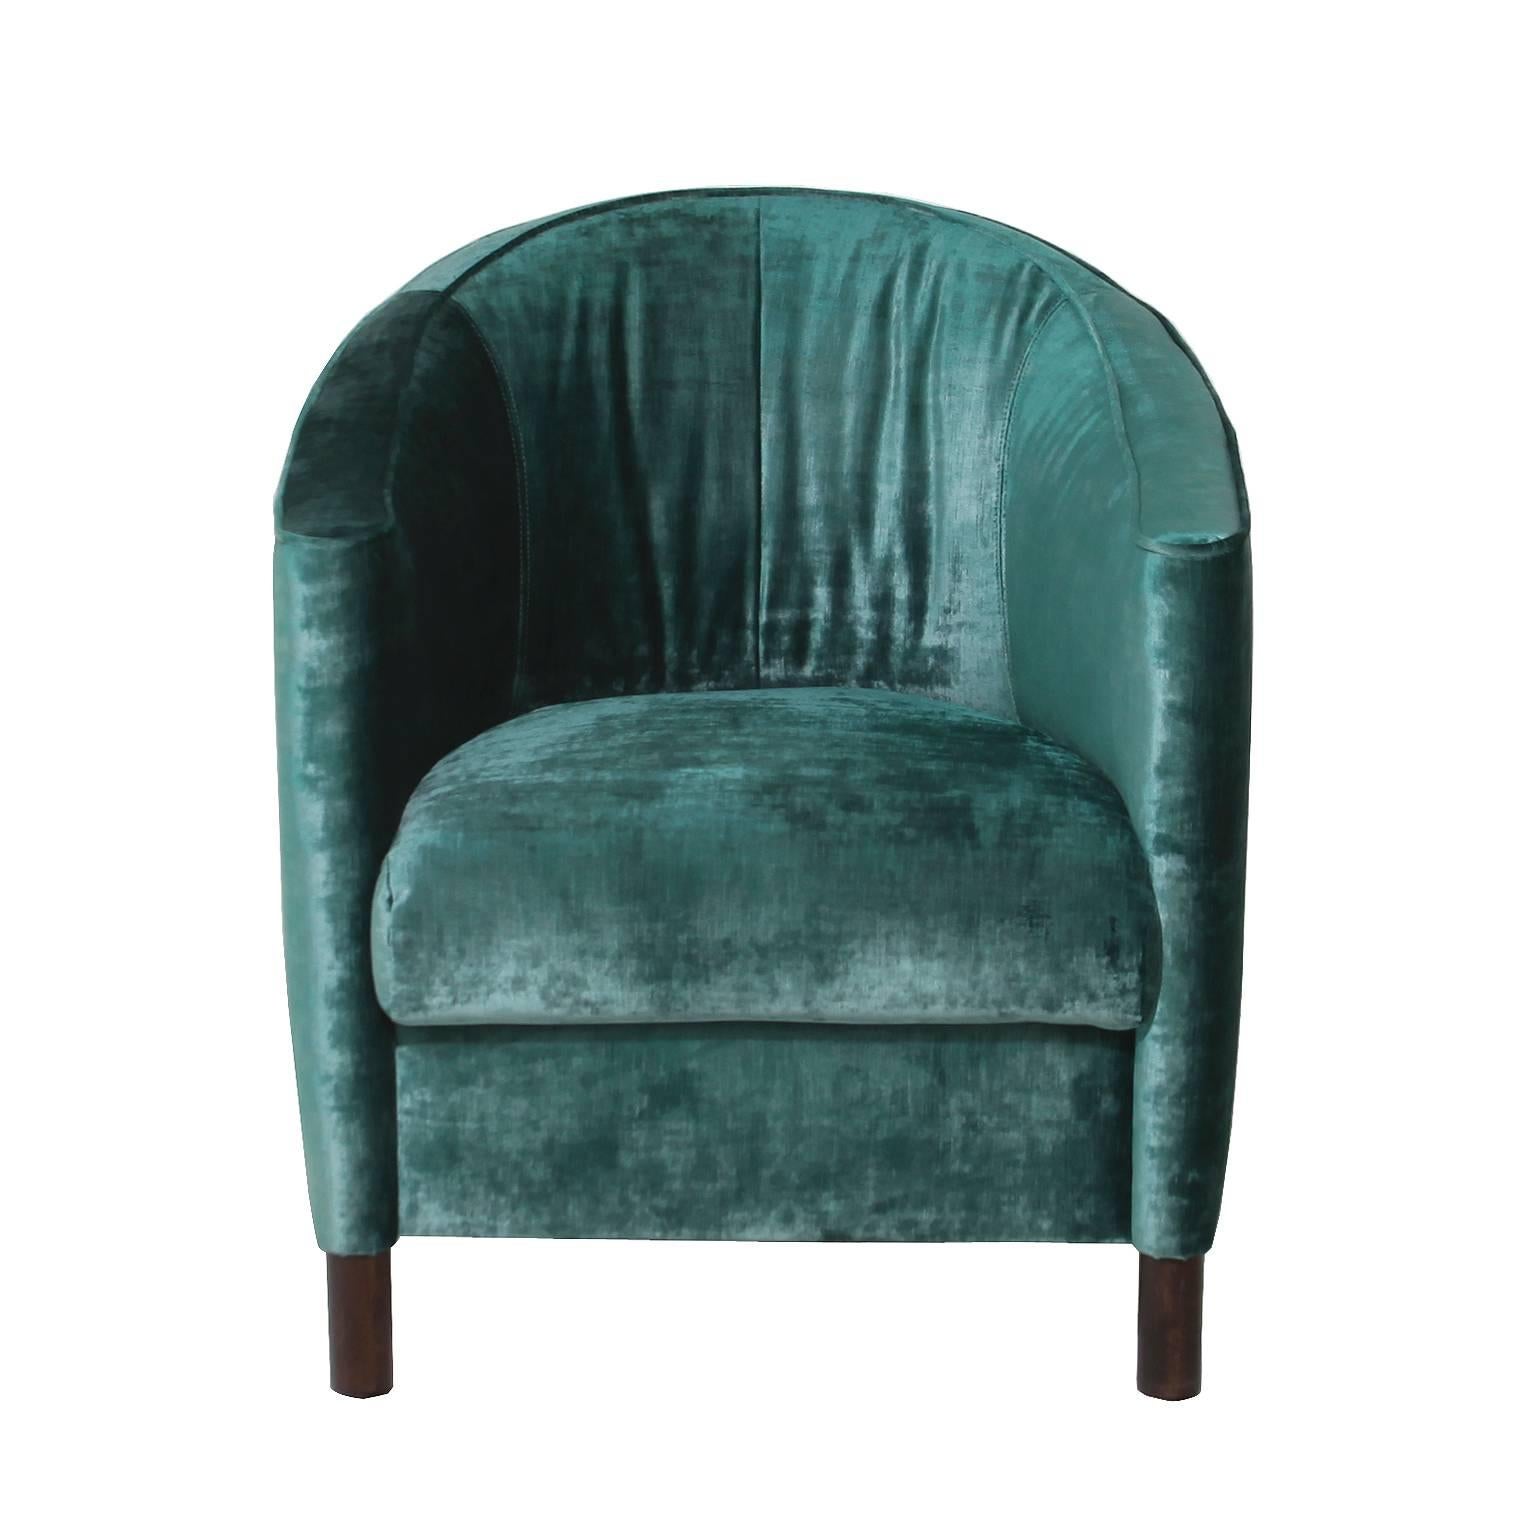 Barrel back occasional chair with turquoise velvet upholstery

Measures: Seat depth 19
Seat high 17.